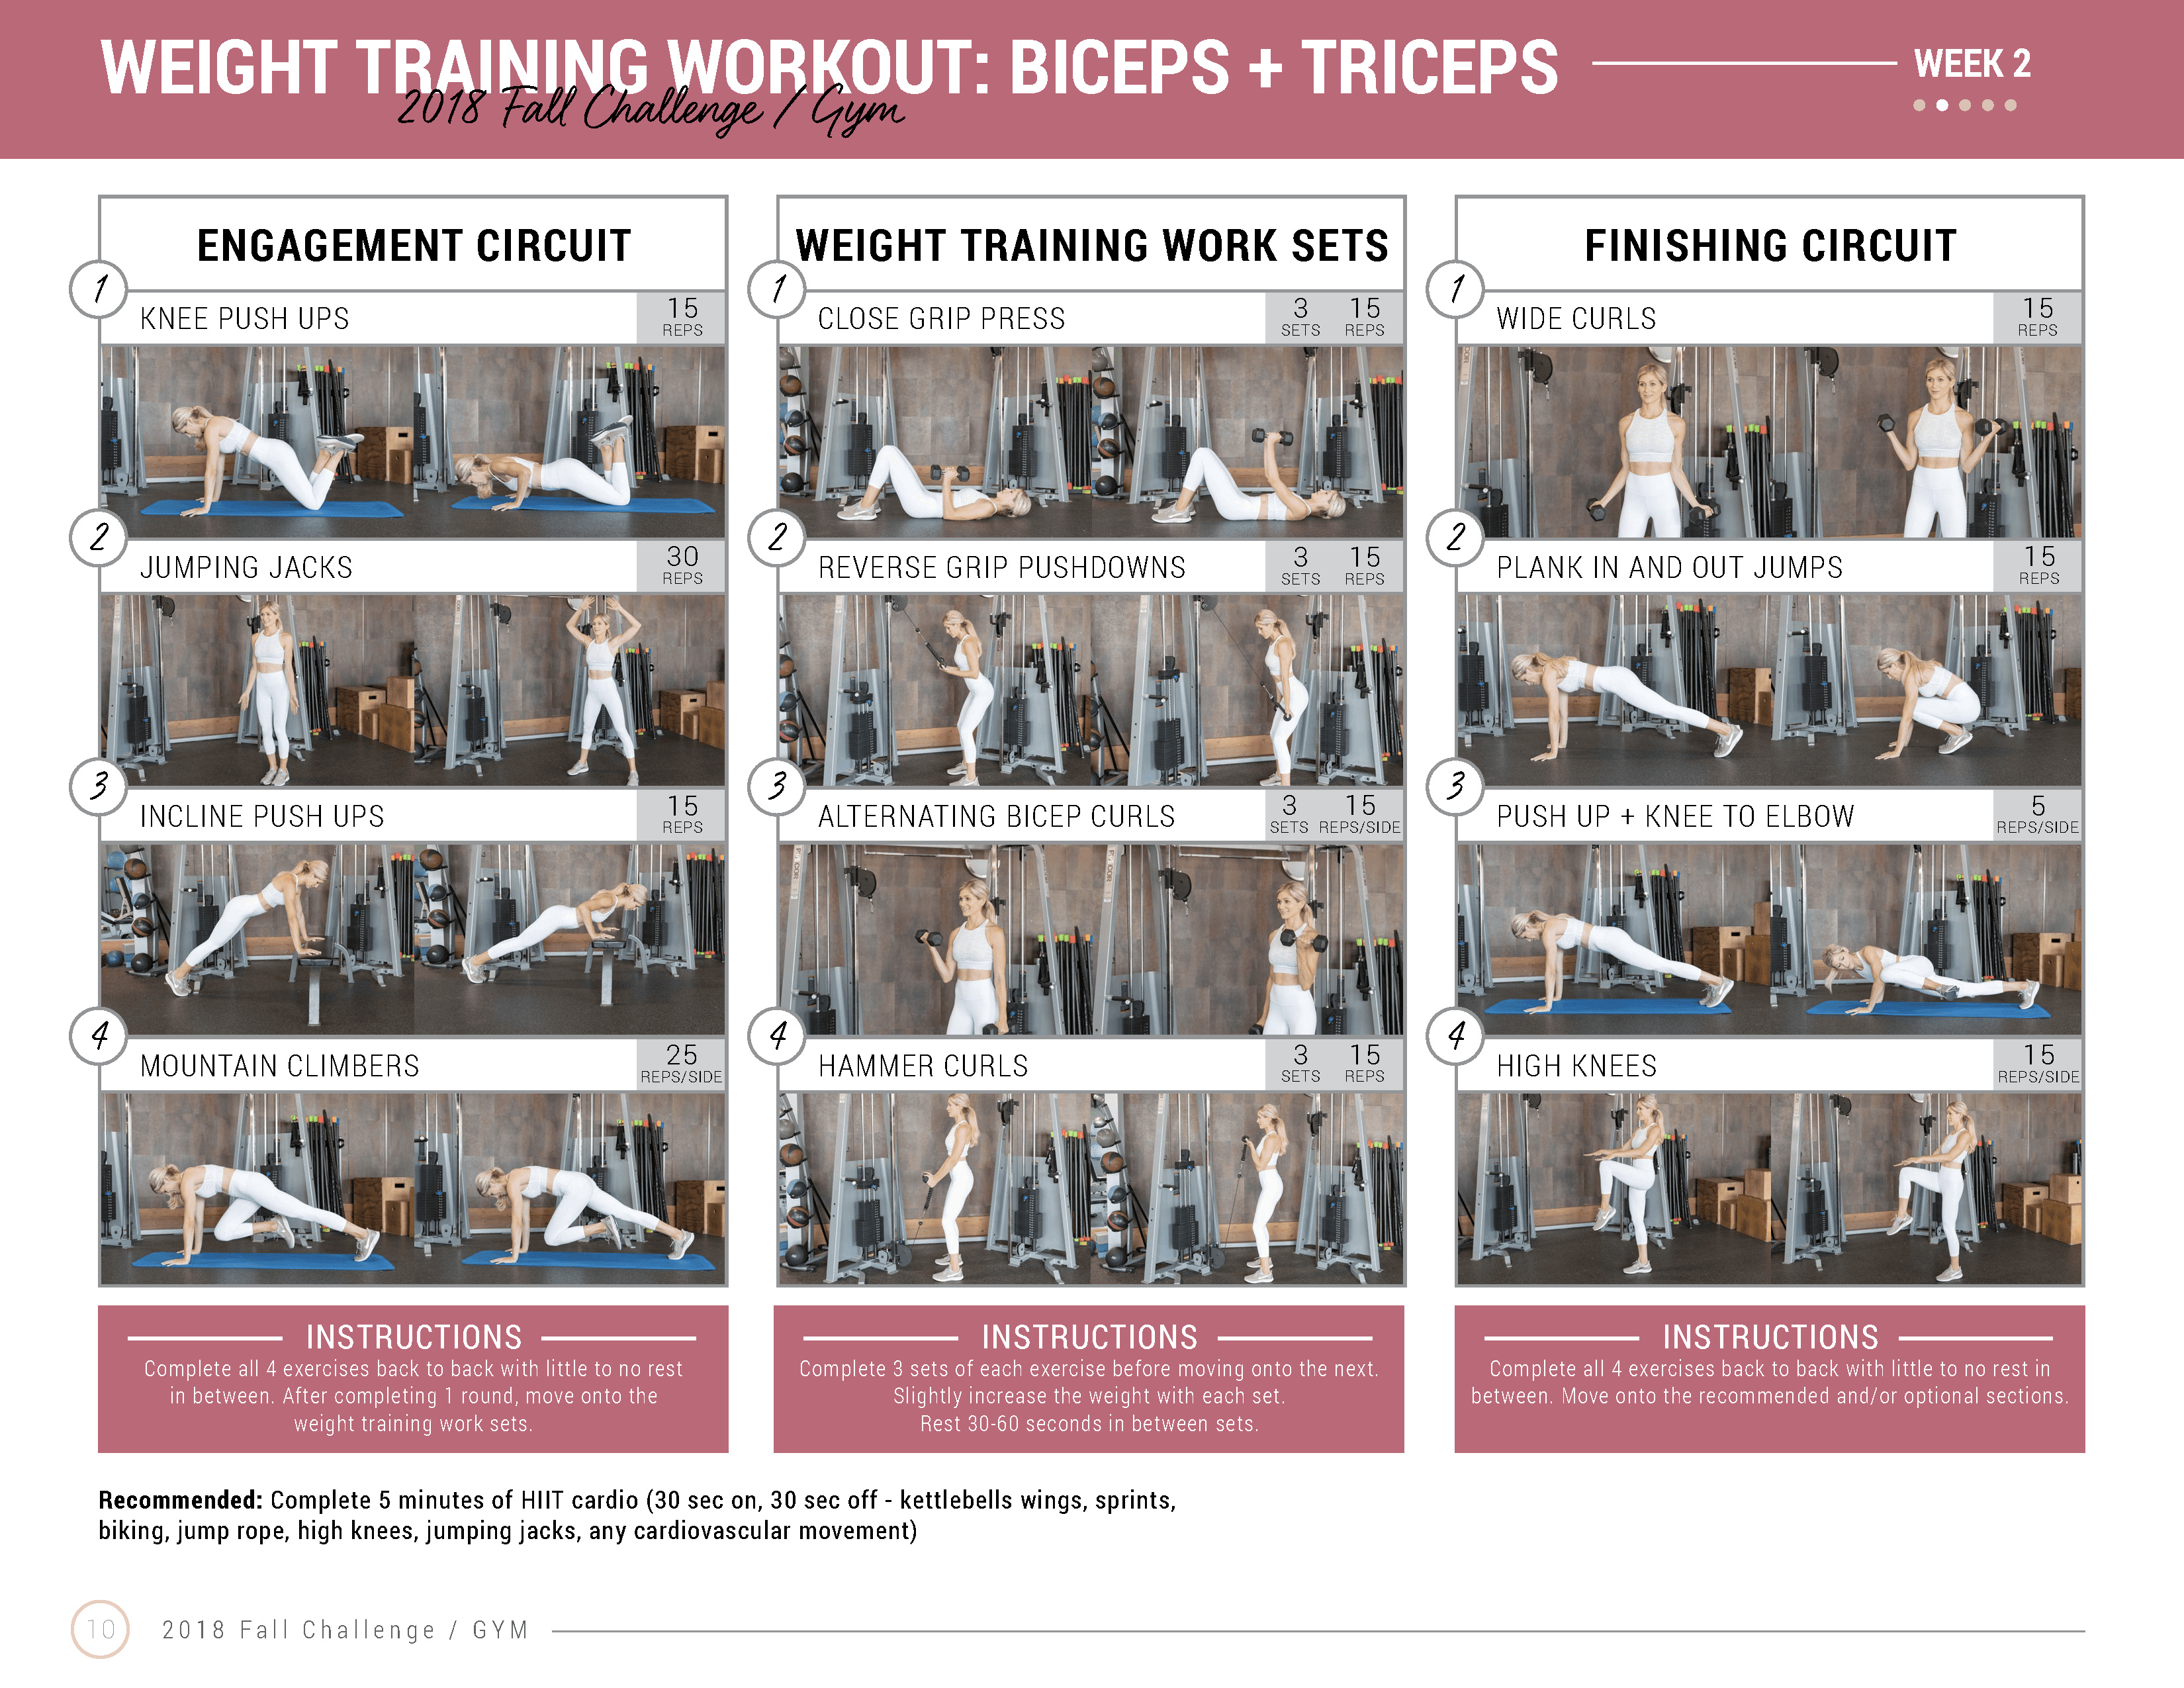 biceps and triceps arms weight training workout